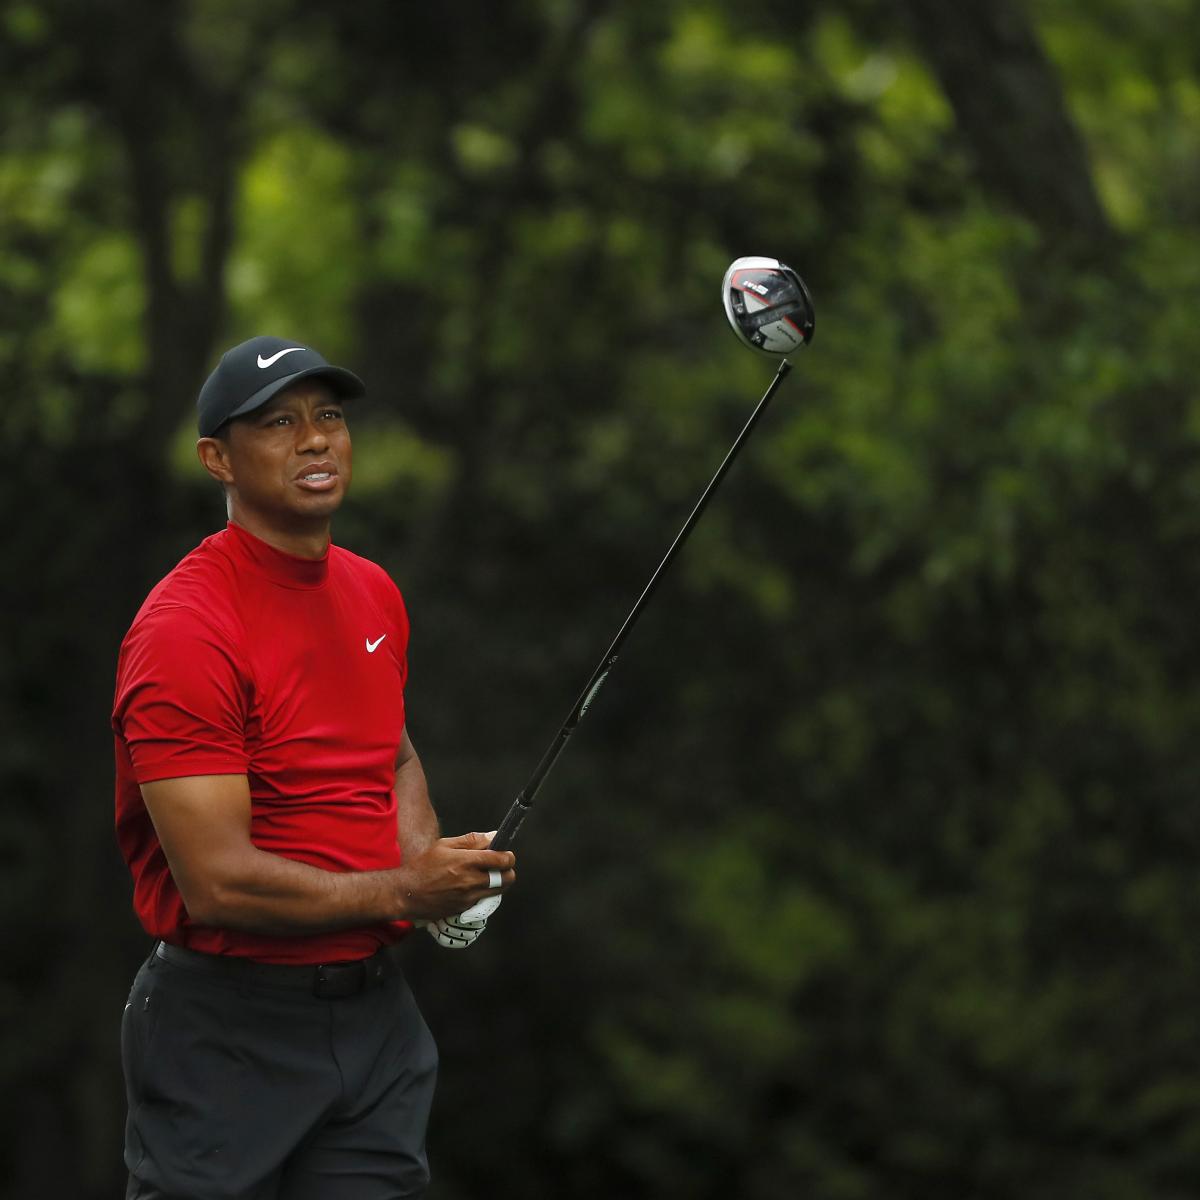 Tiger Woods at 2019 Masters Top Highlights, Full Scorecard from